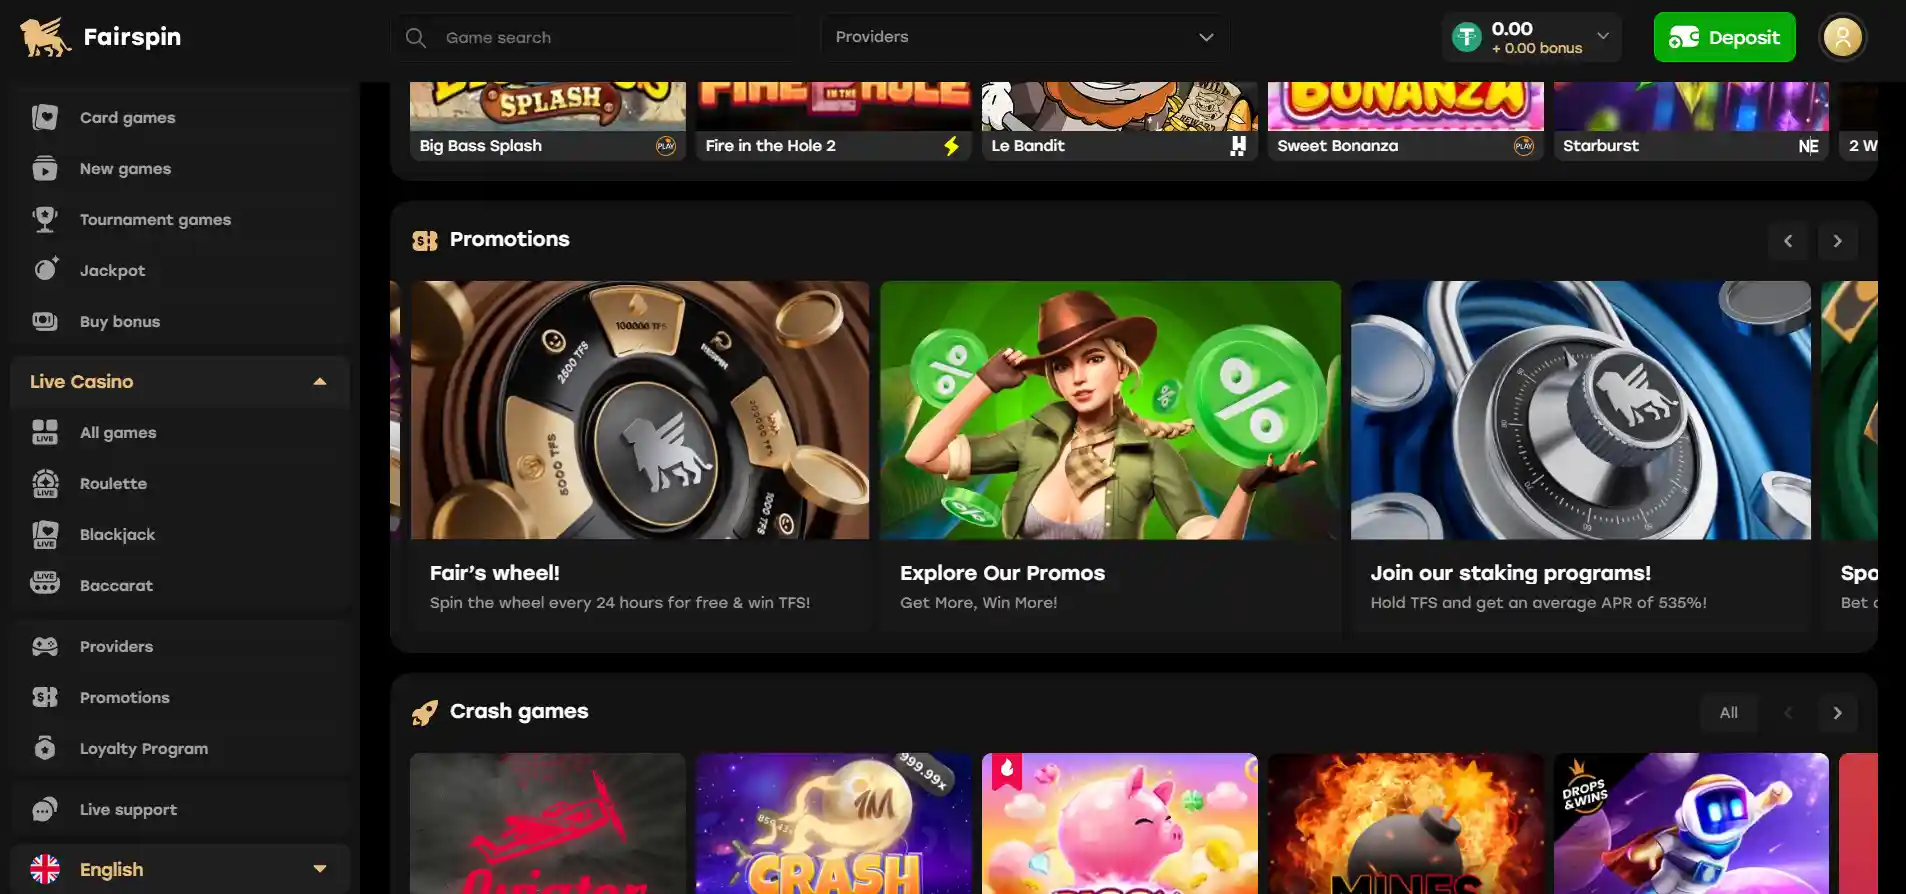 fairspin crypto casino promotions